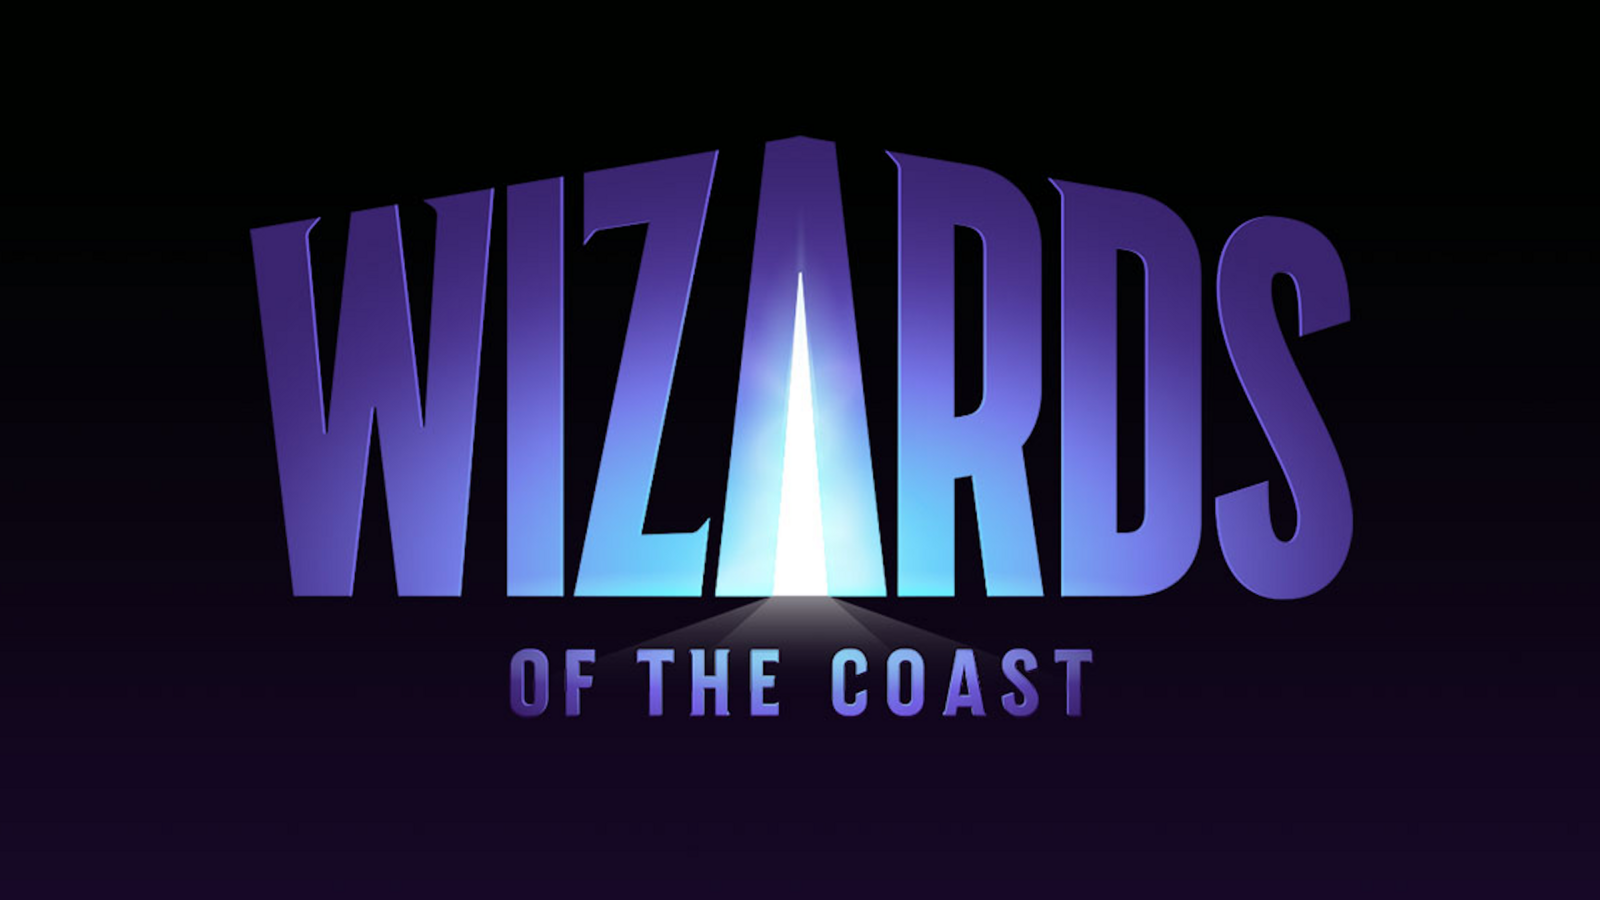 Design jobs at Wizards of the Coast